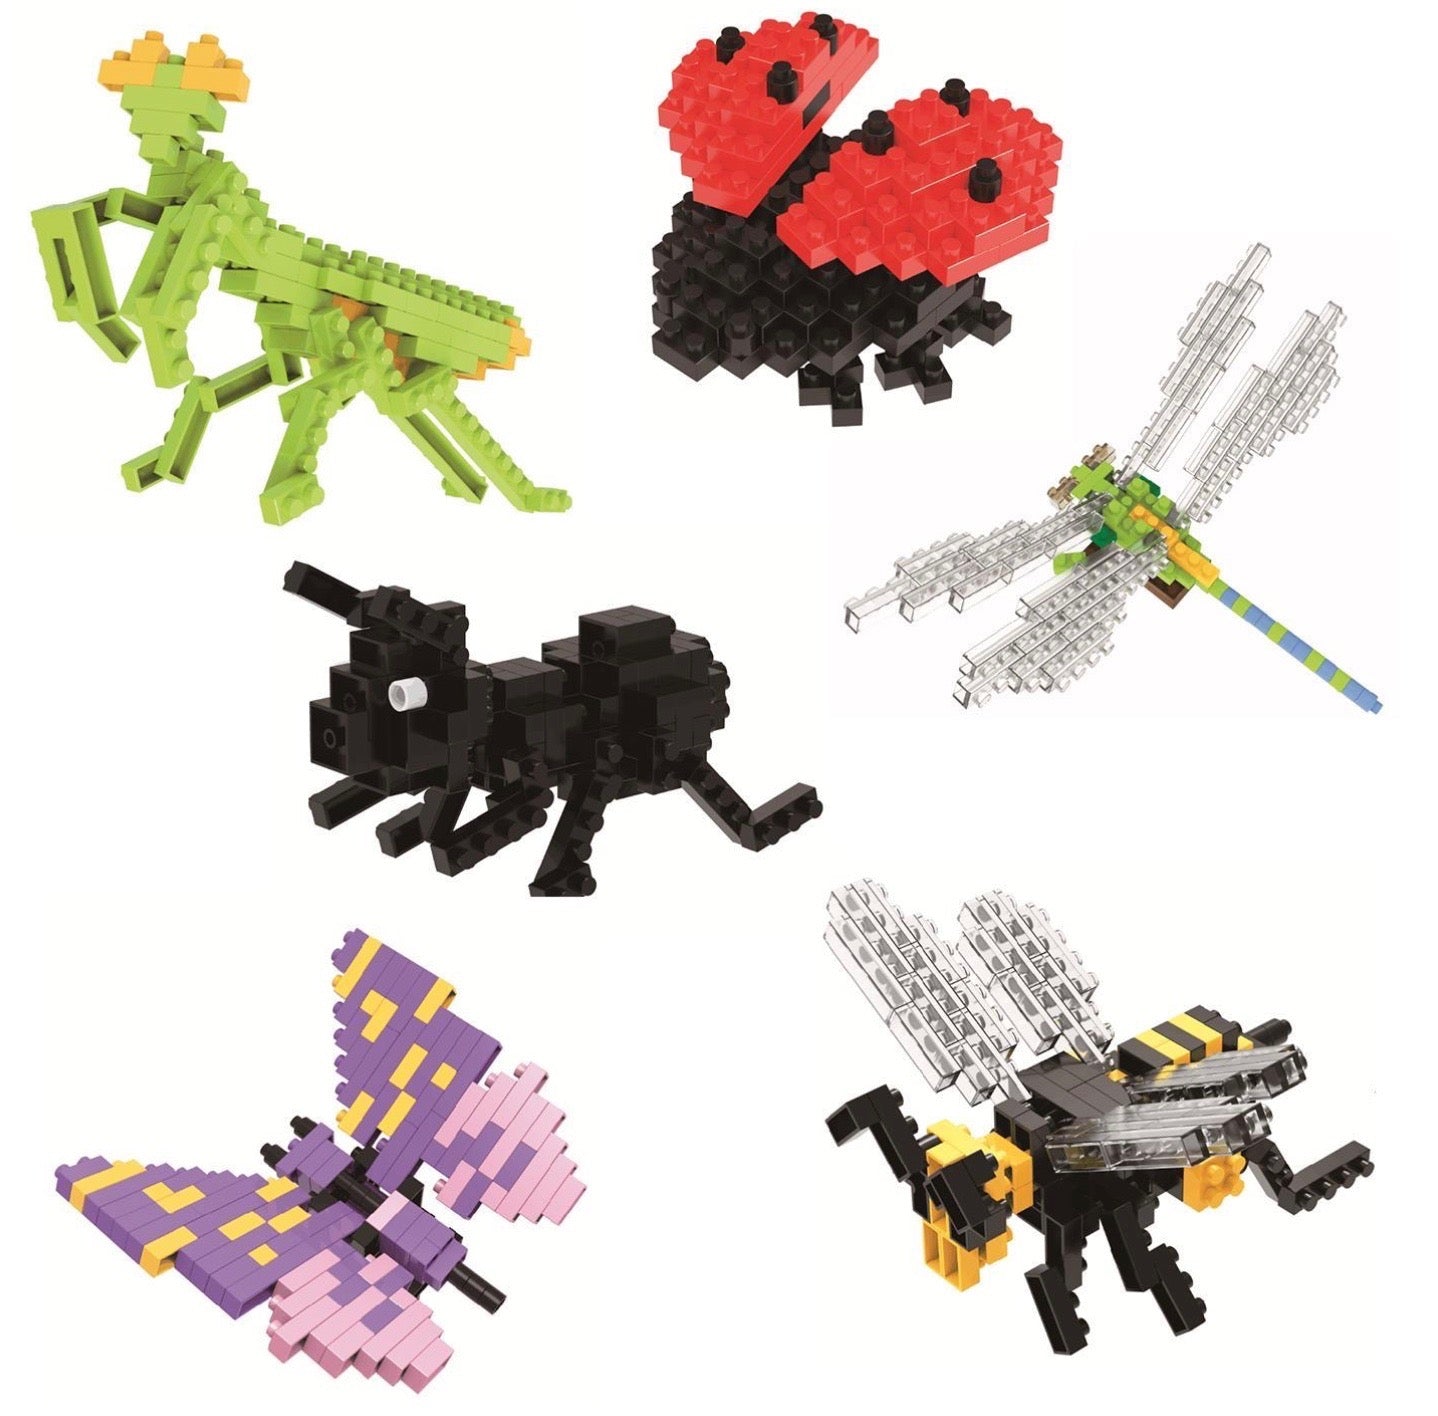 Insect Building Blocks